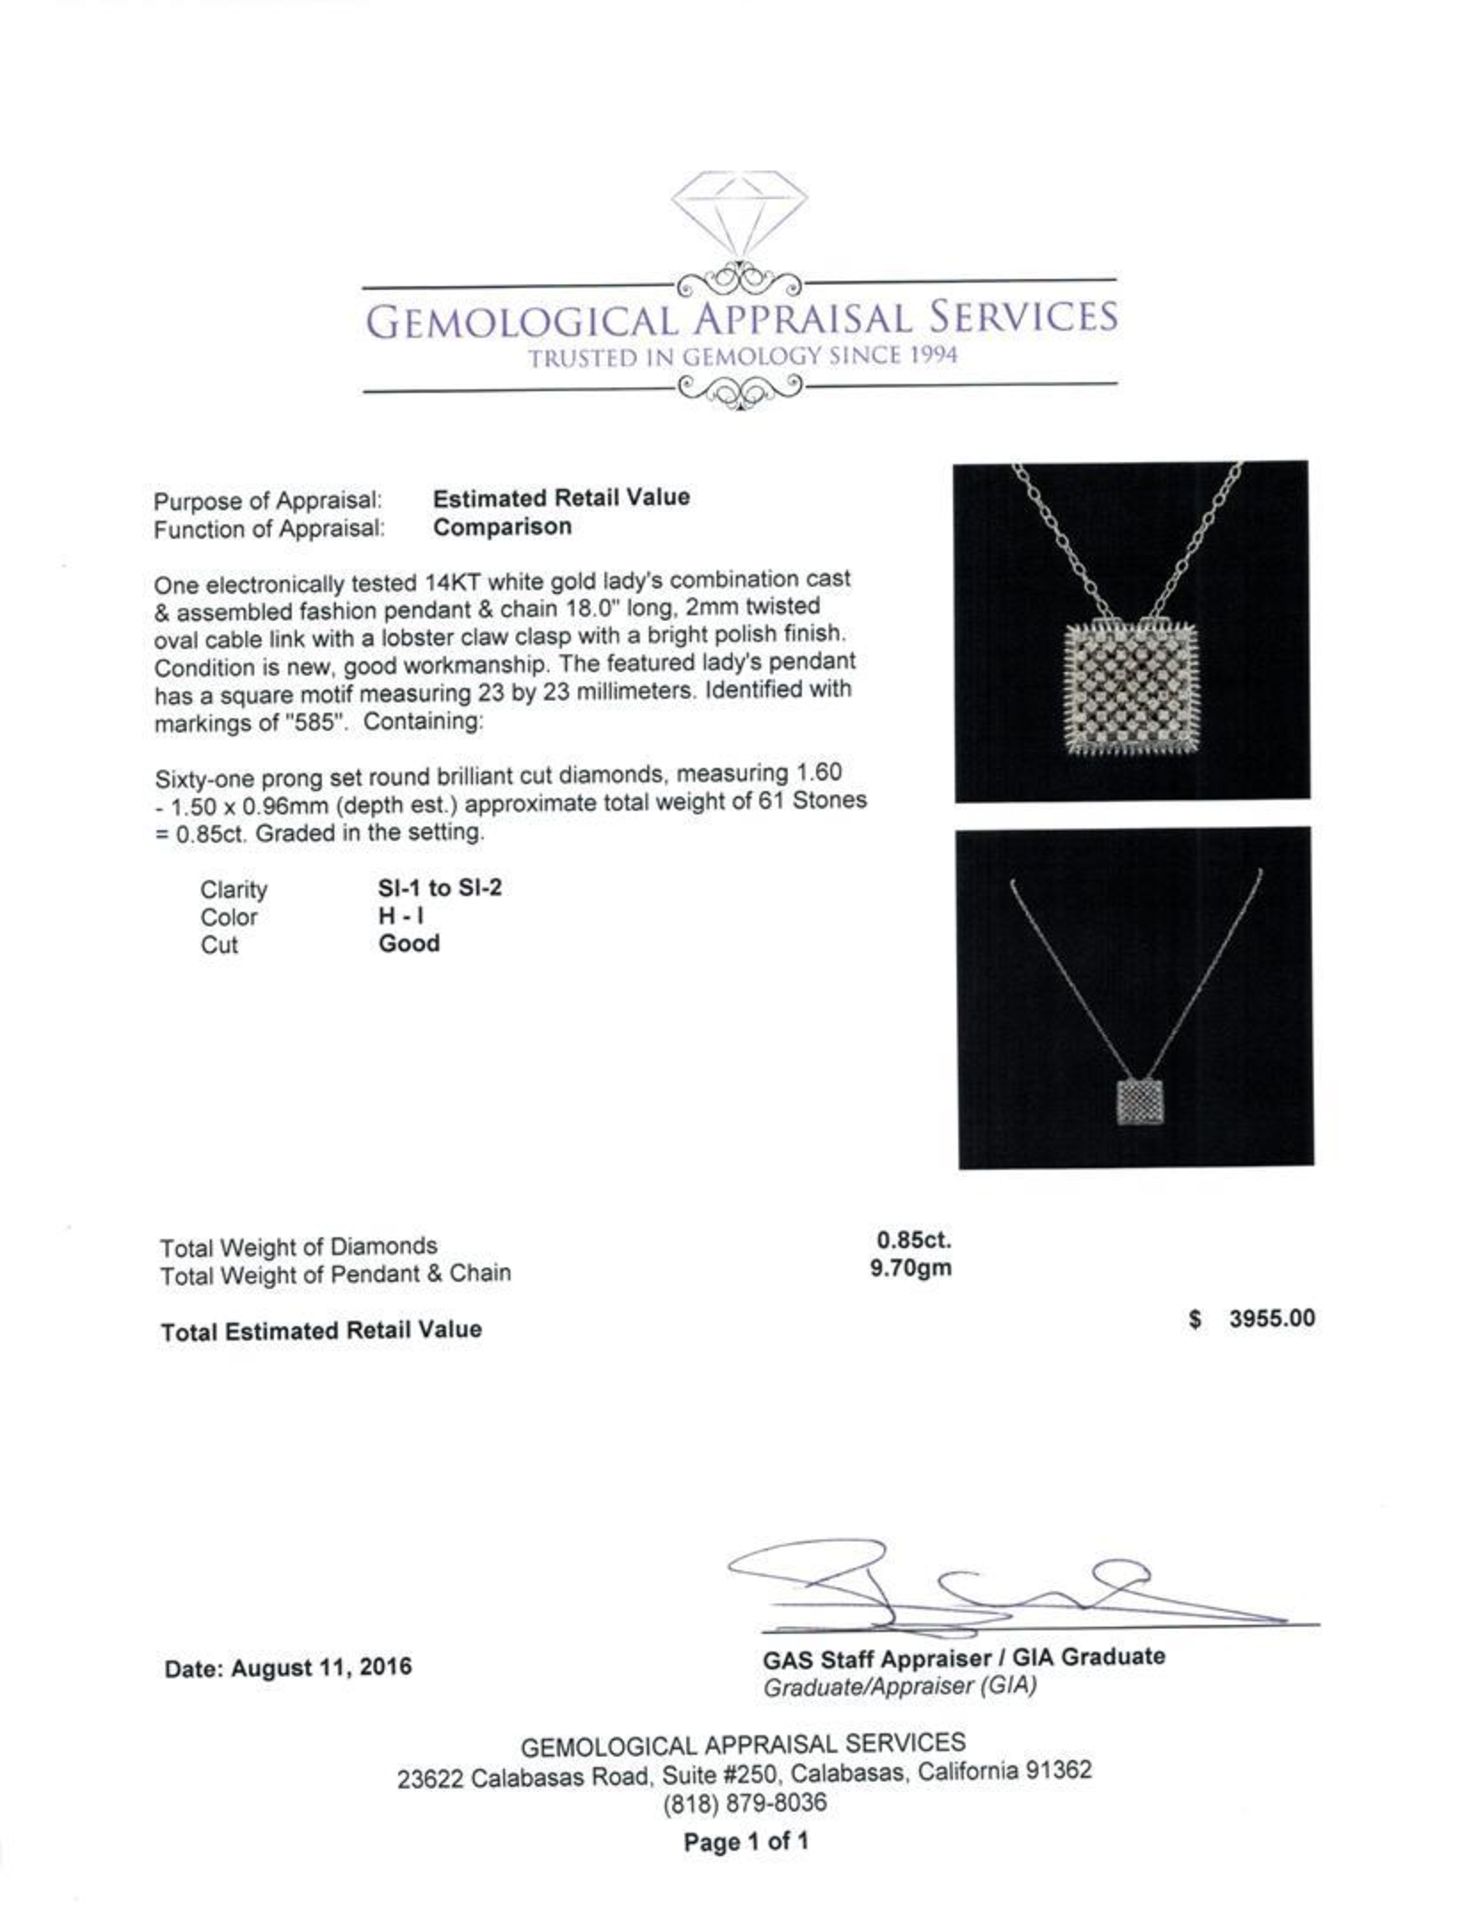 0.85 ctw Diamond Pendant With Chain - 14KT White Gold - Image 3 of 3